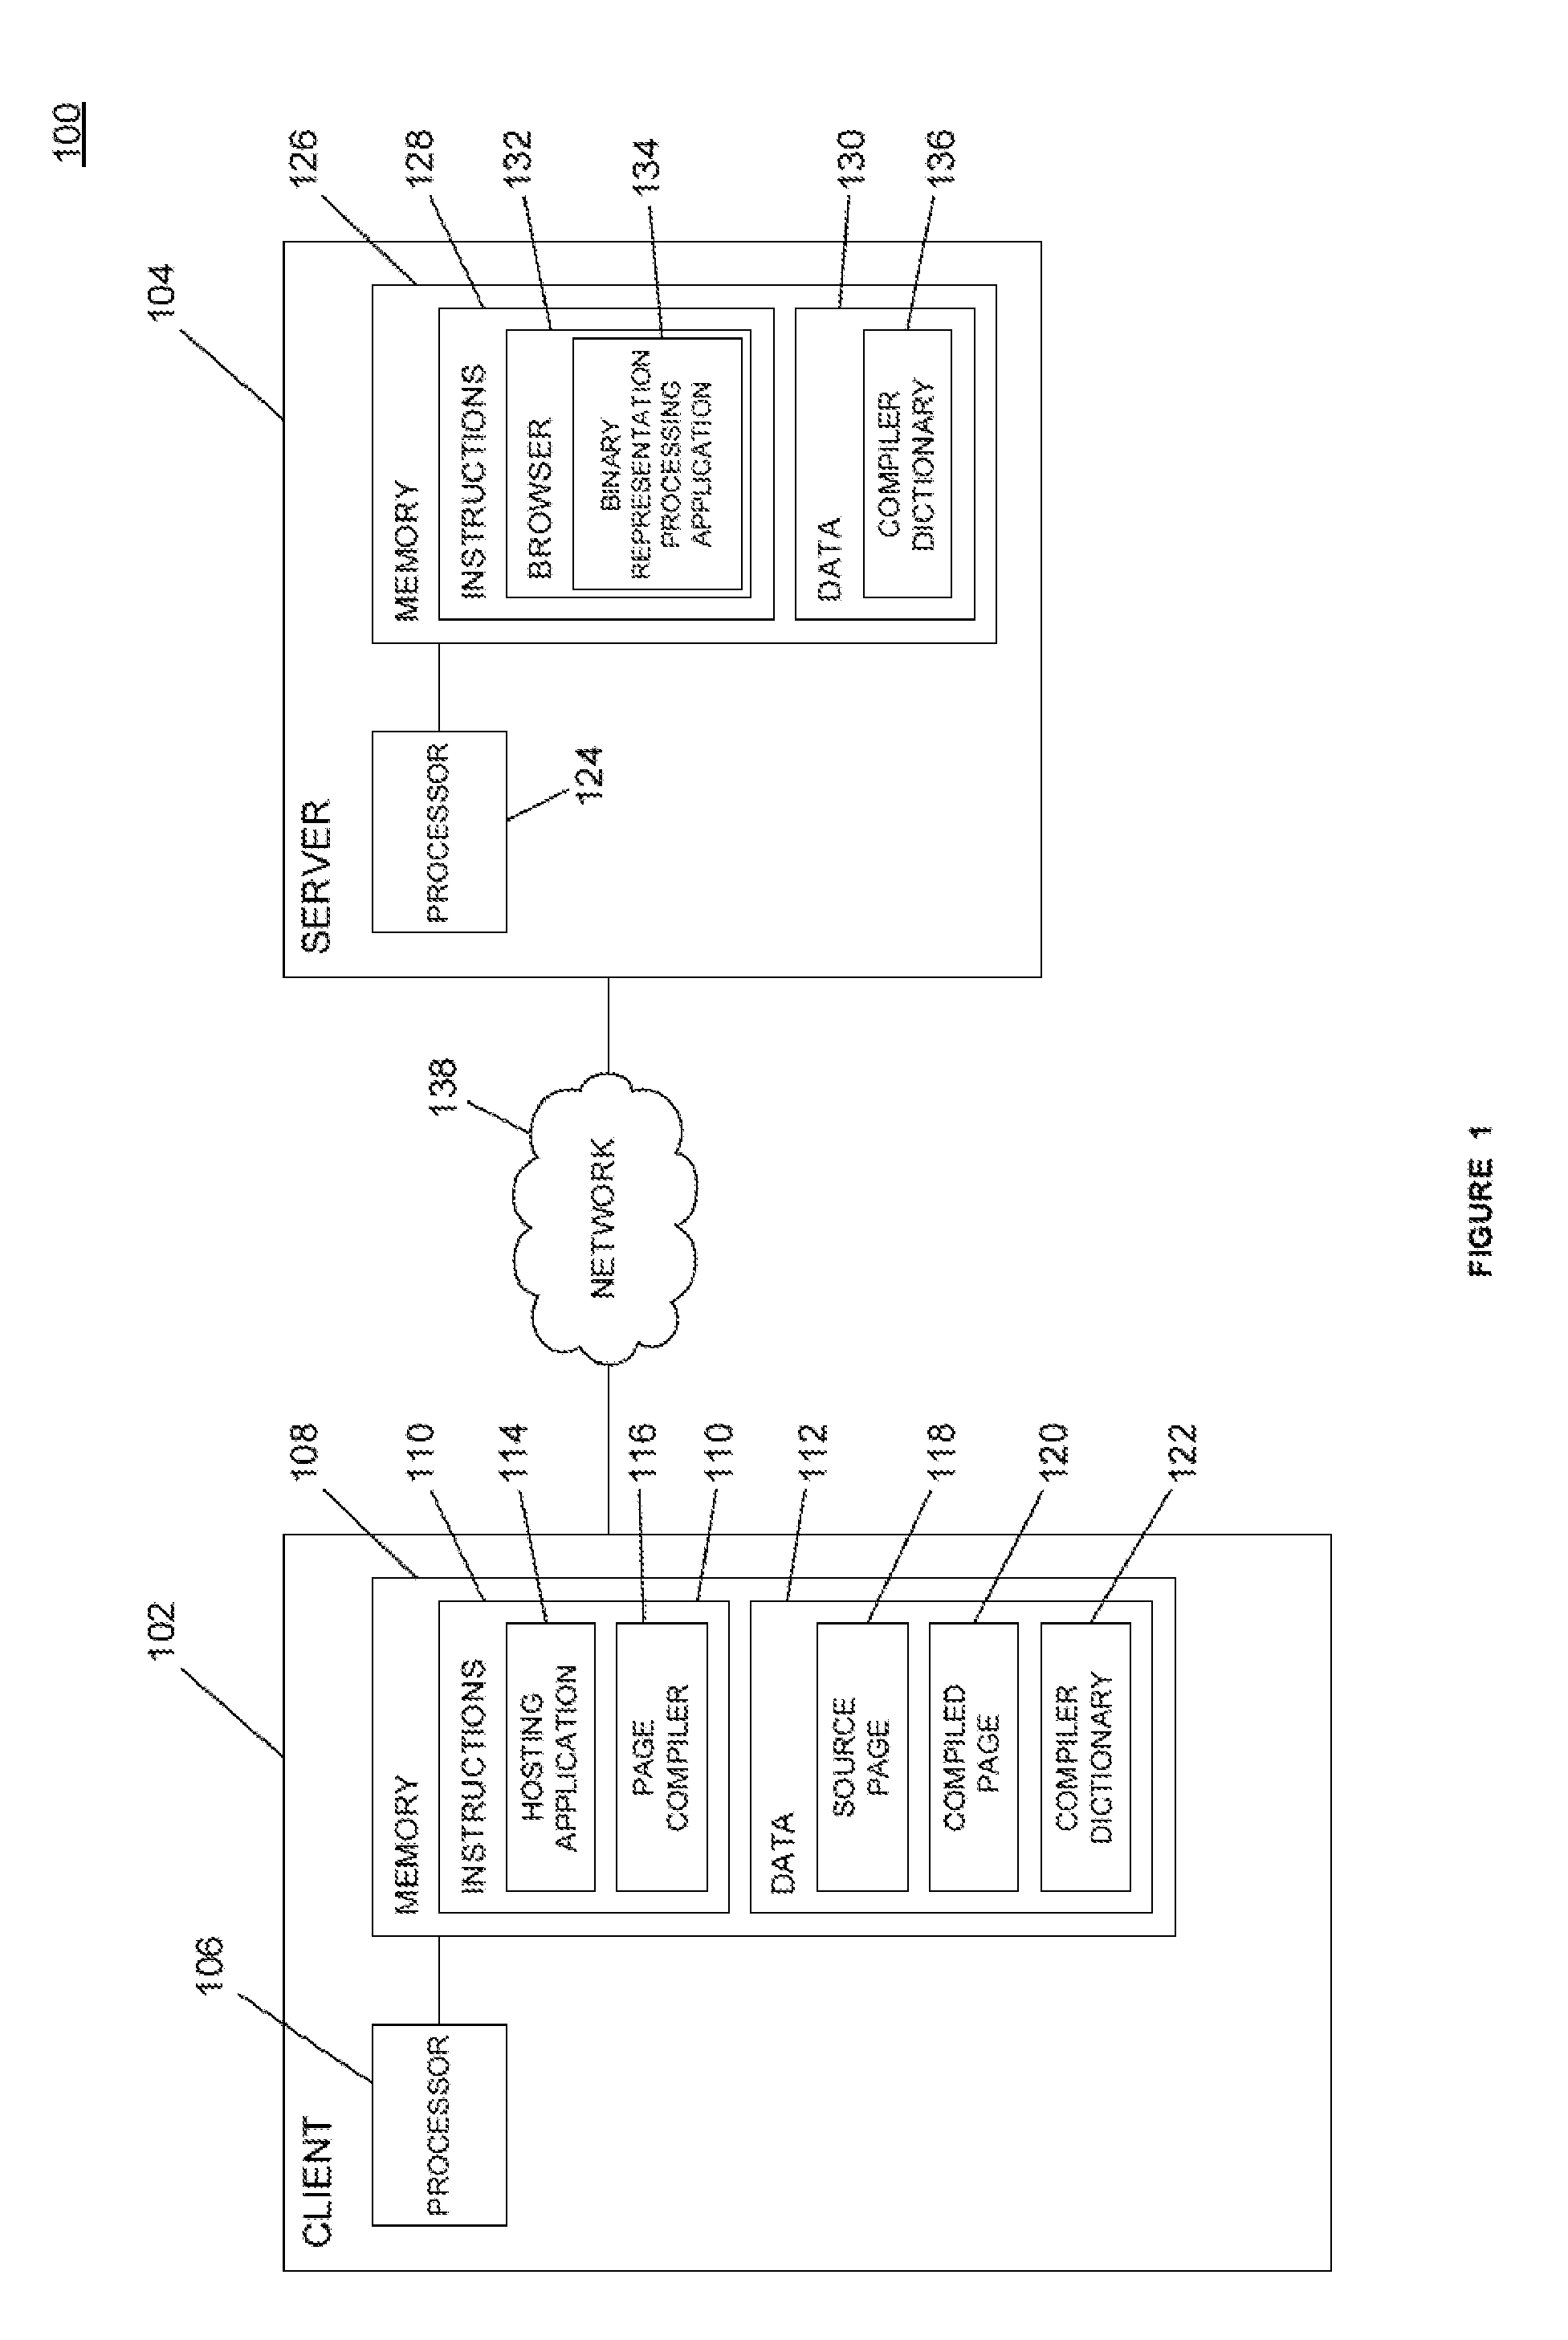 System and method providing a binary representation of a web page